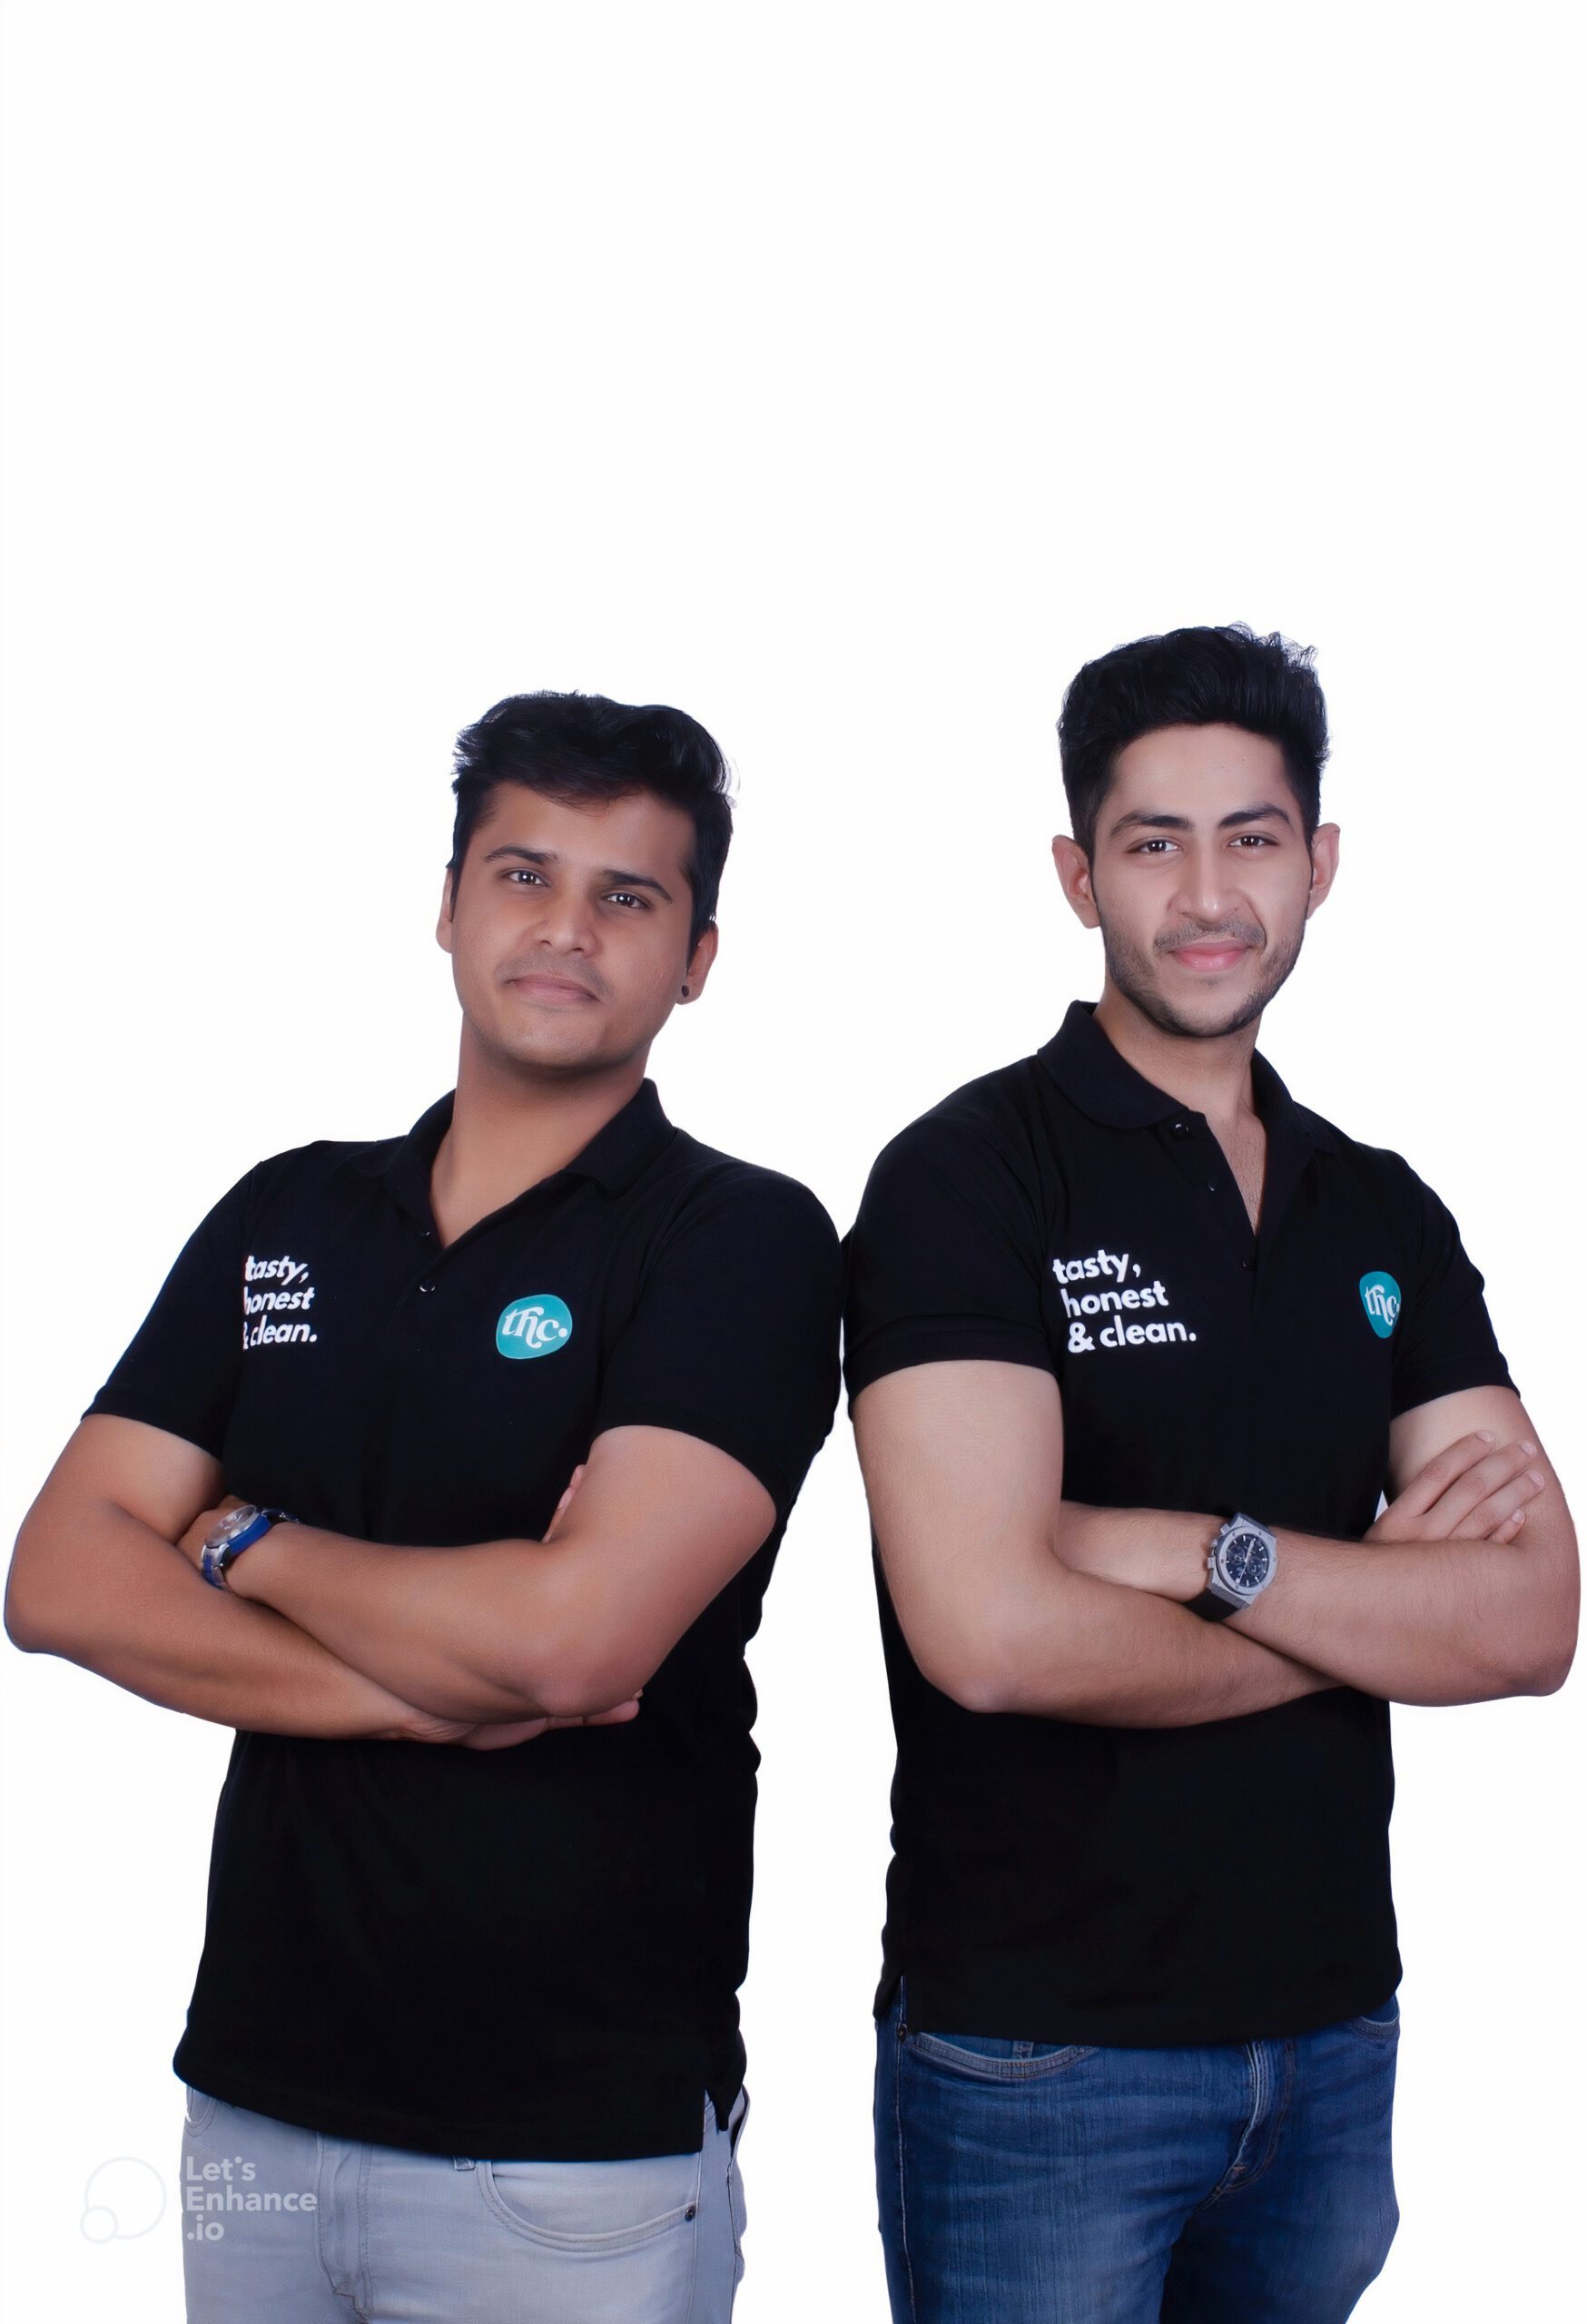 Health and Wellness Platform ‘The Healthy Company raises’ an undisclosed amount in Pre-Series A round led by Inflection Point Ventures